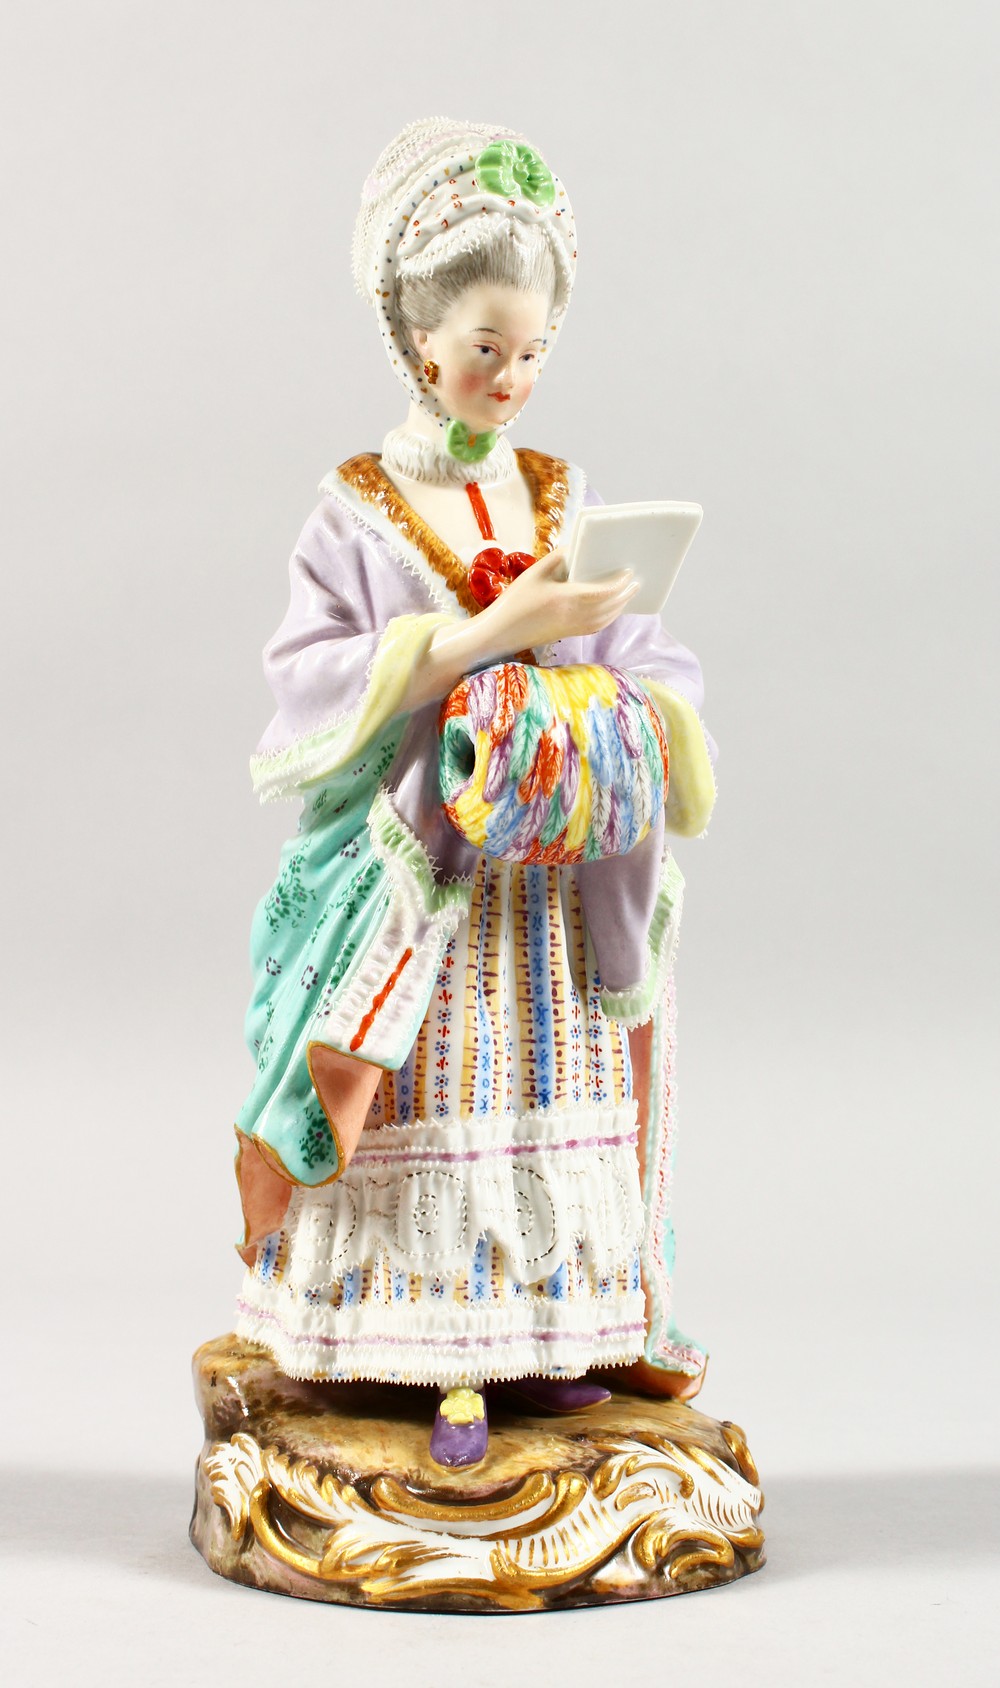 A GOOD 19TH CENTURY MEISSEN PORCELAIN FIGURE OF A LADY with muff, reading a book. Cross swords